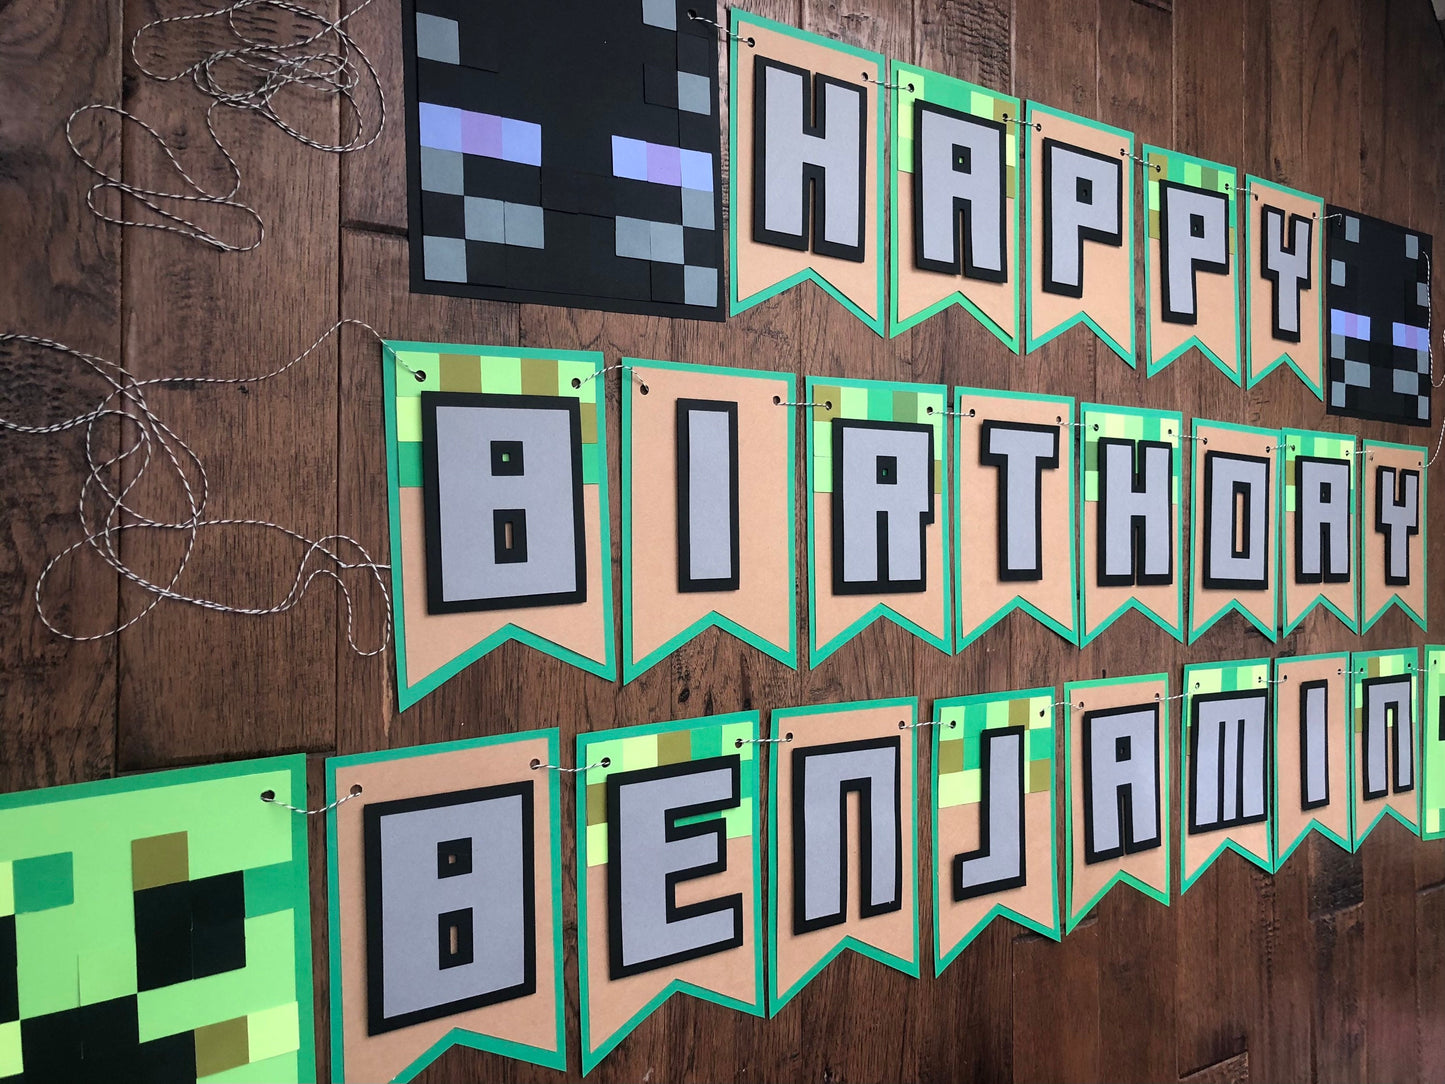 Pixel Party Mine Craft Inspired Creeper TNT Look A Like Birthday Banner